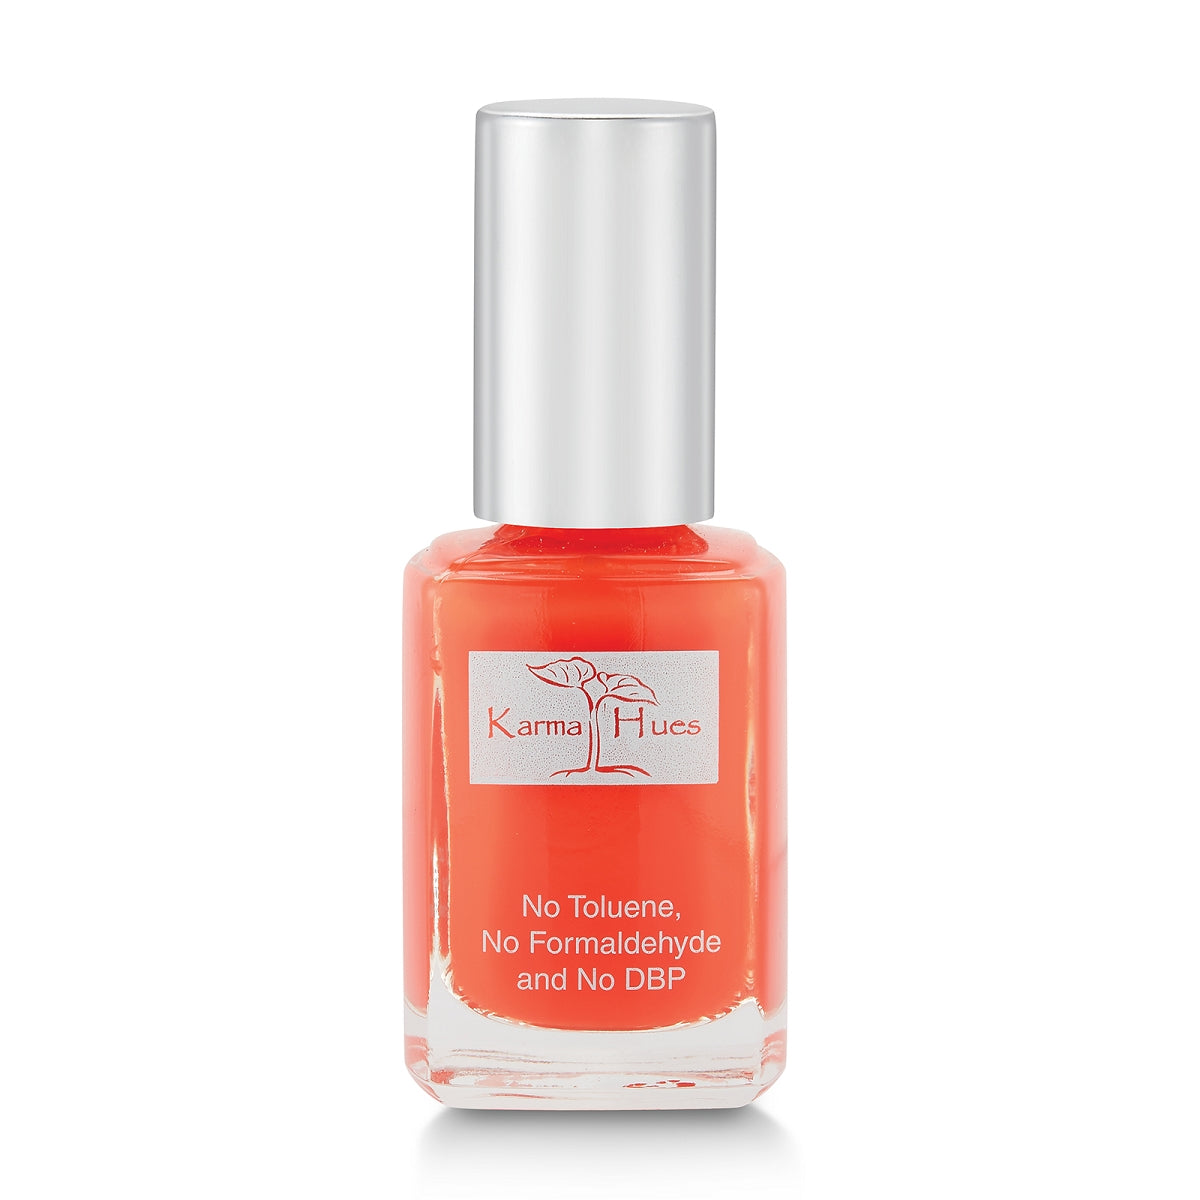 Girls Against M.S. - Nail Polish; Non-Toxic, Vegan, and Cruelty-Free (#482)